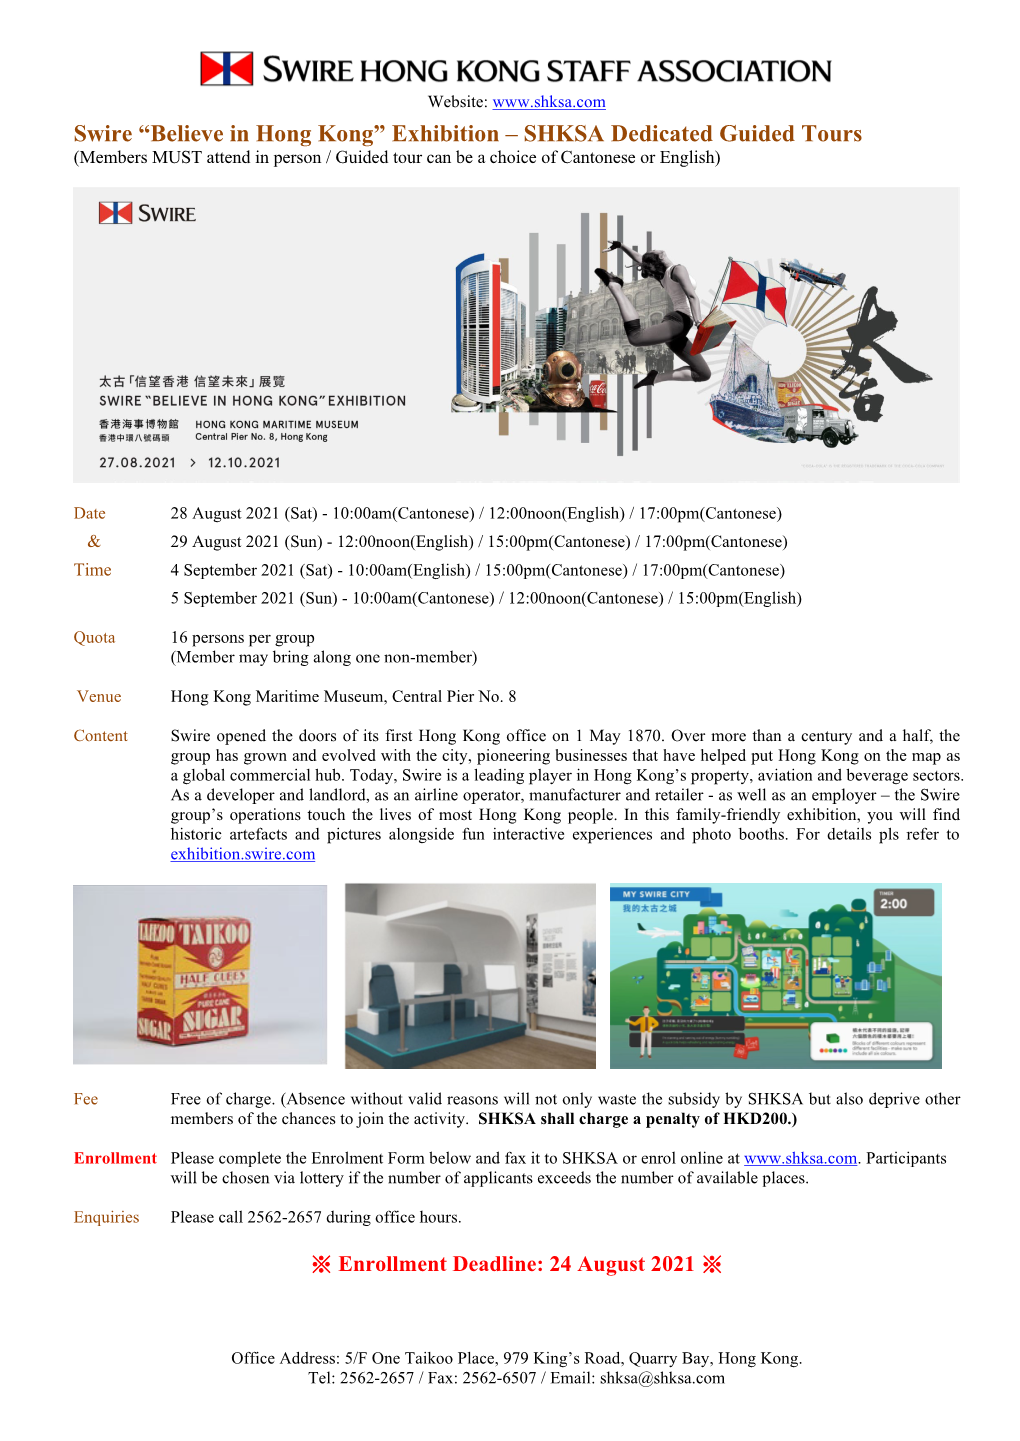 Swire “Believe in Hong Kong” Exhibition – SHKSA Dedicated Guided Tours (Members MUST Attend in Person / Guided Tour Can Be a Choice of Cantonese Or English)